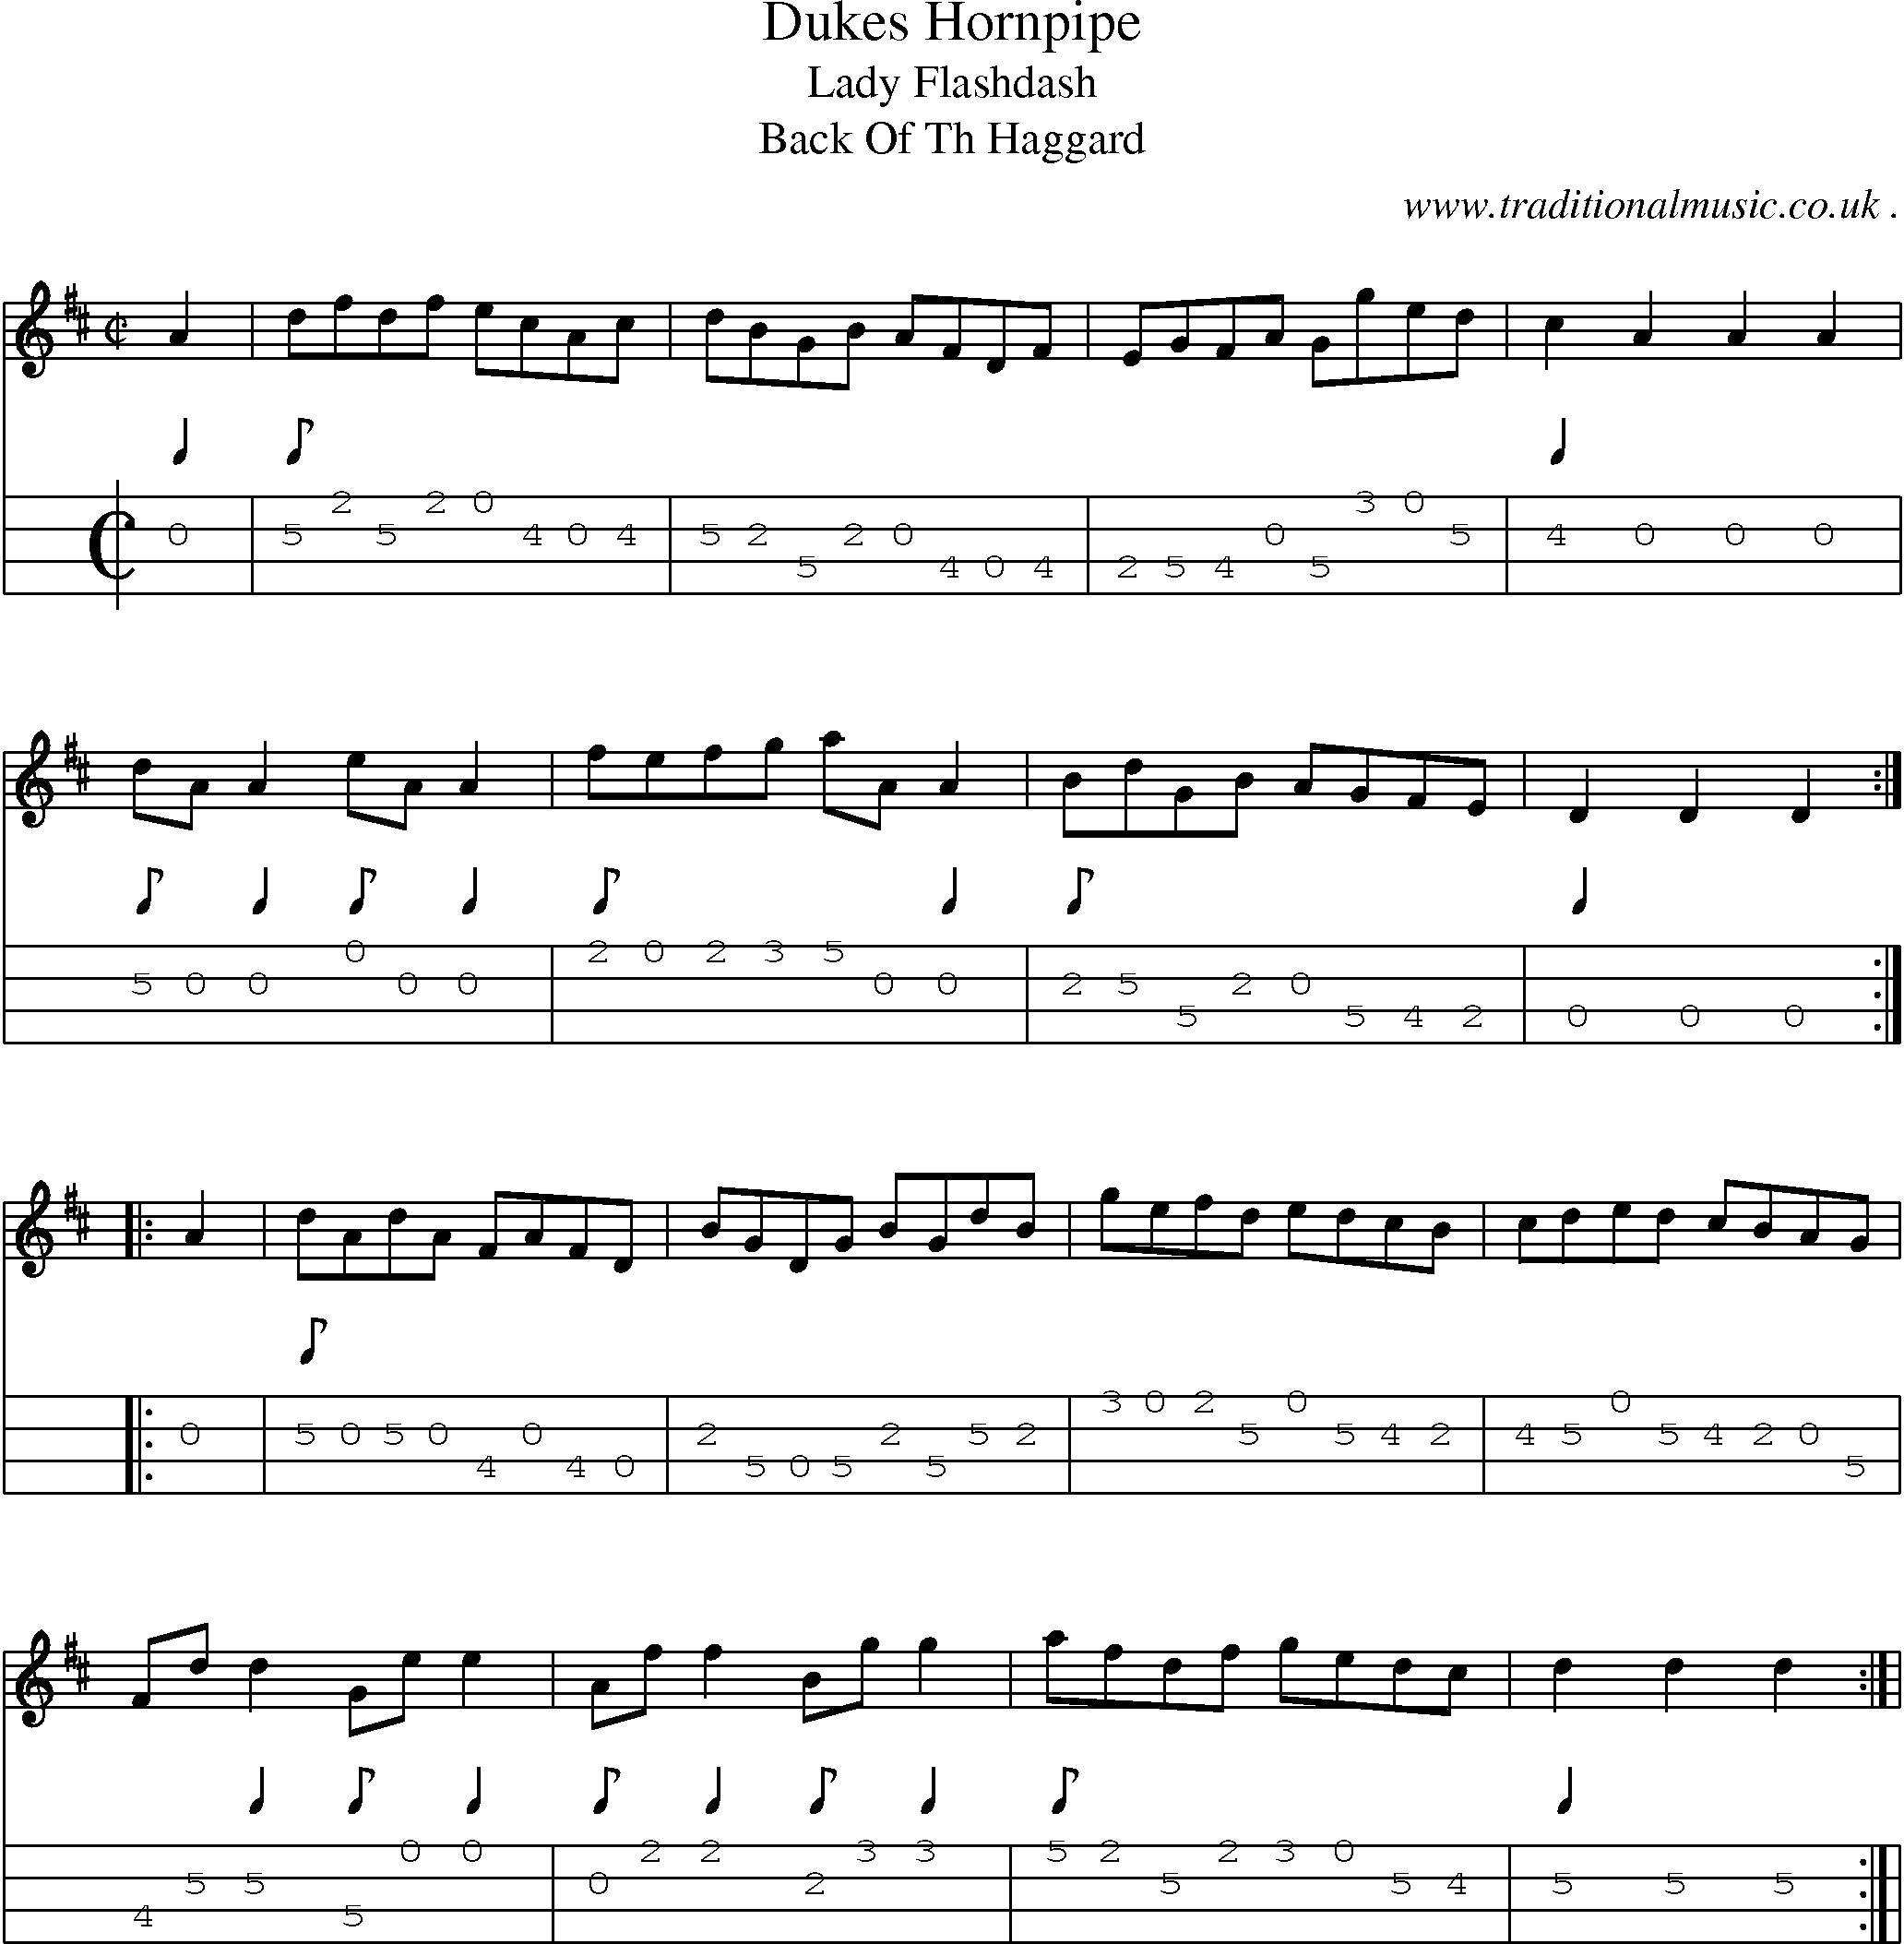 Sheet-Music and Mandolin Tabs for Dukes Hornpipe